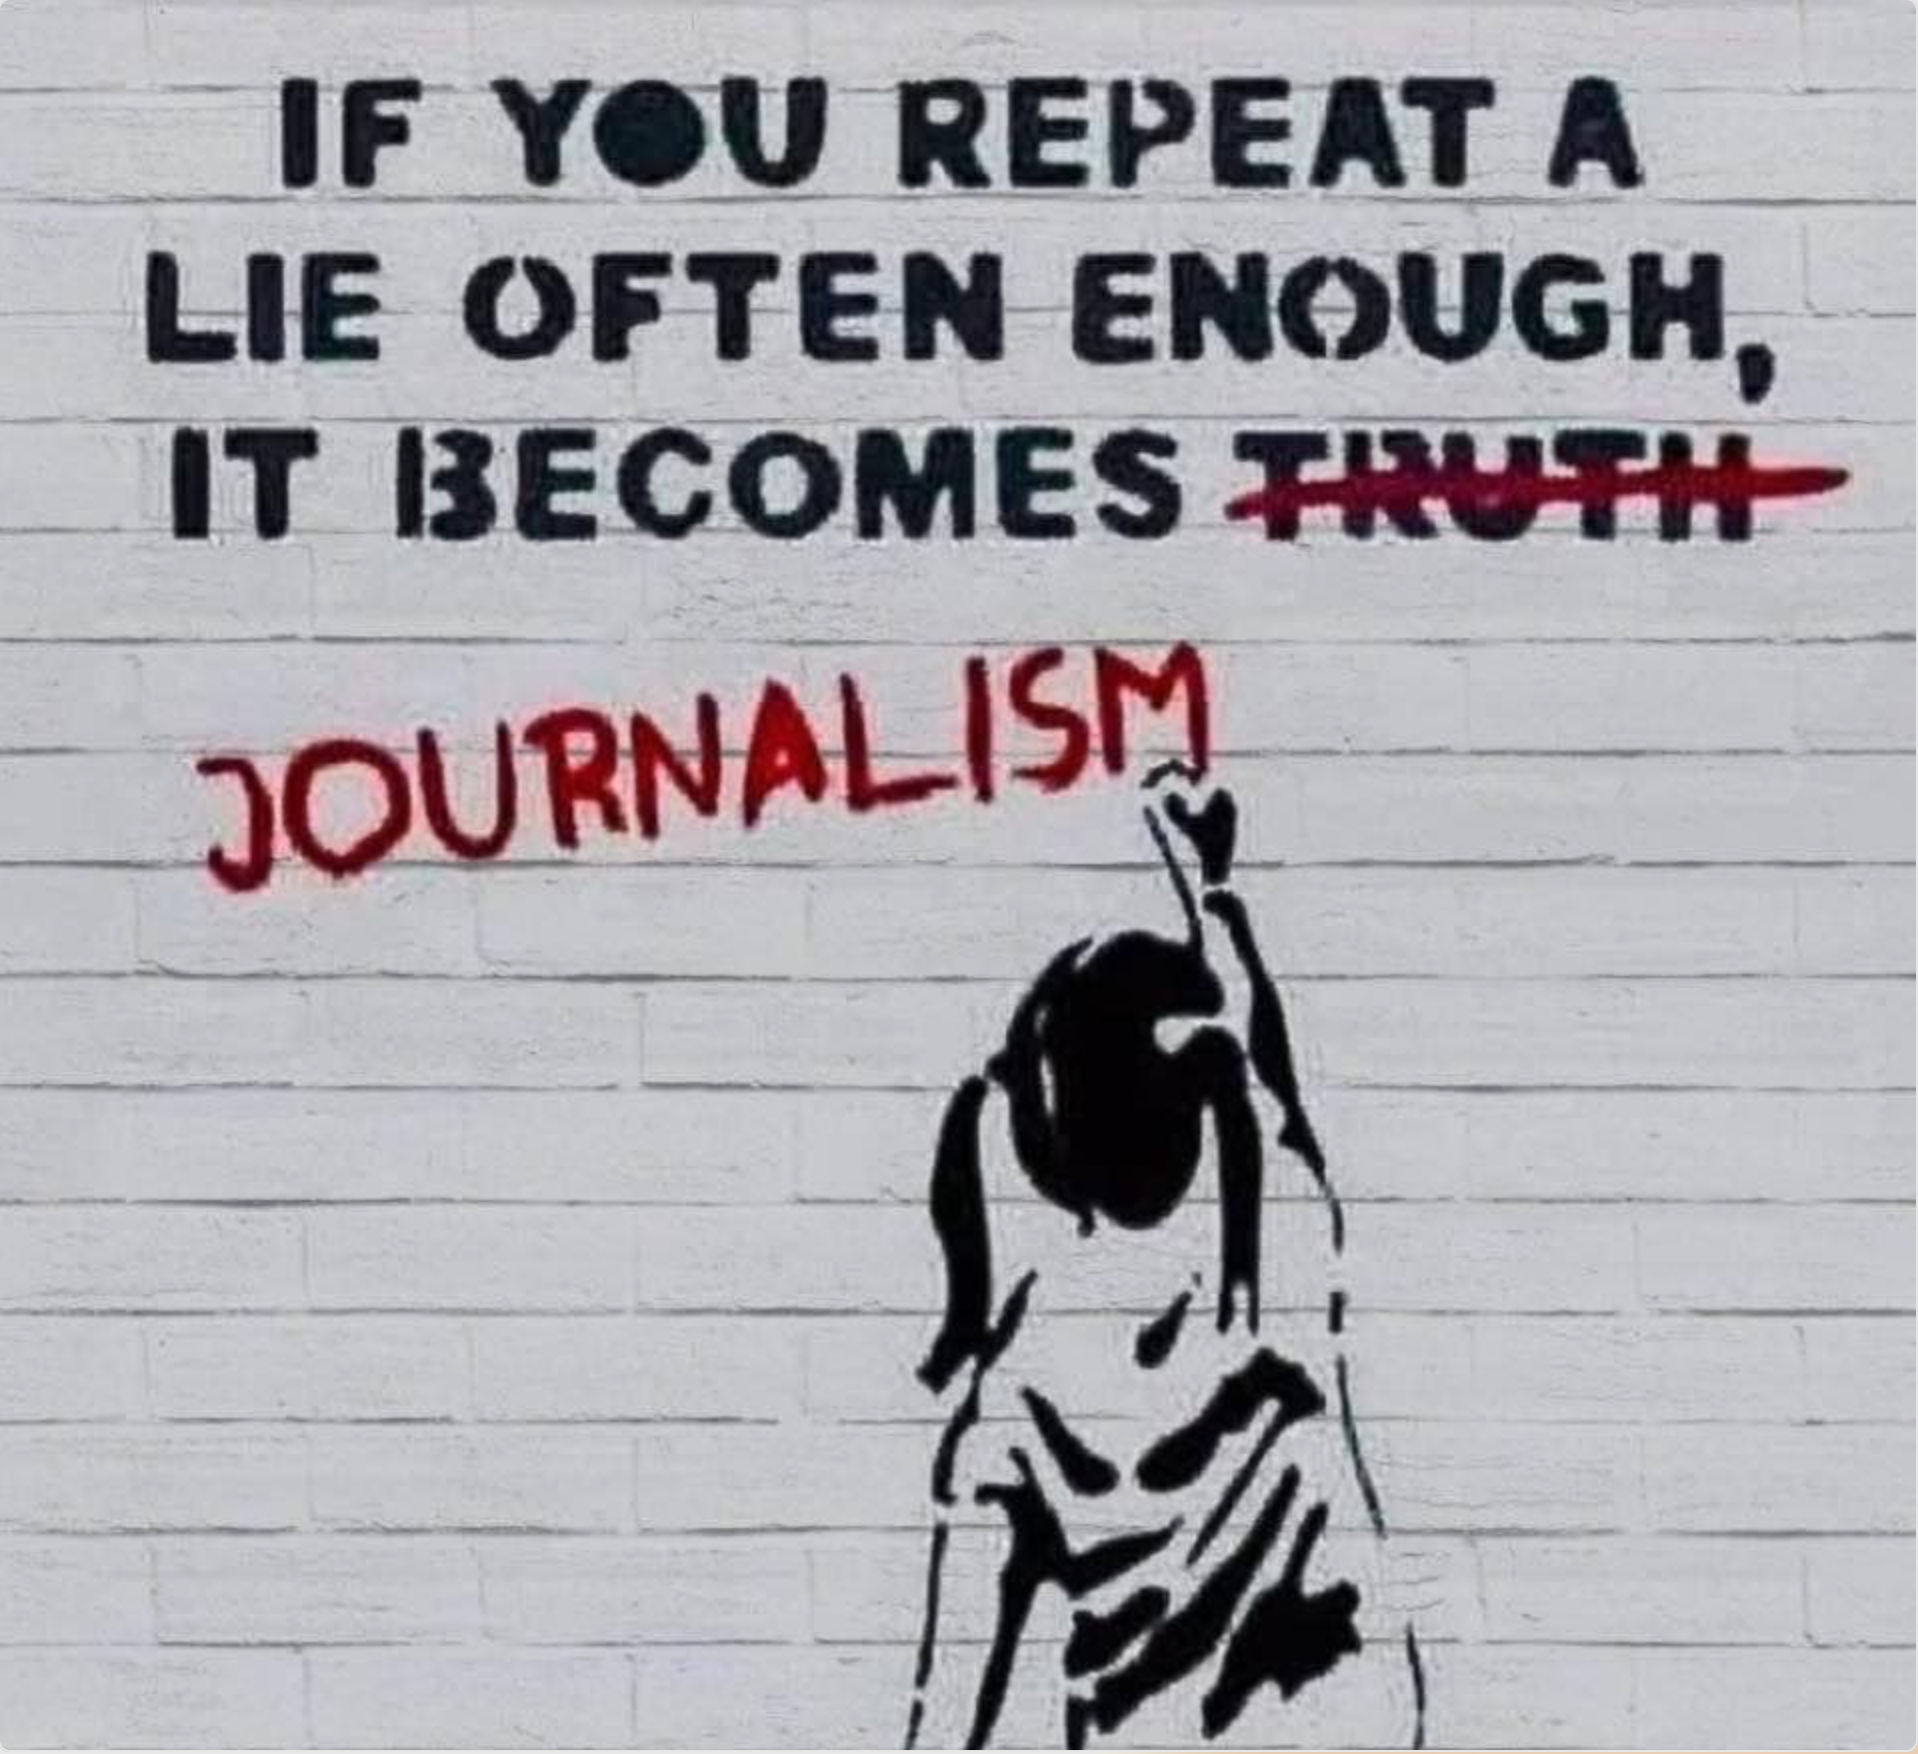 A child writing on a wall that repeat a lie enough becomes journalism.